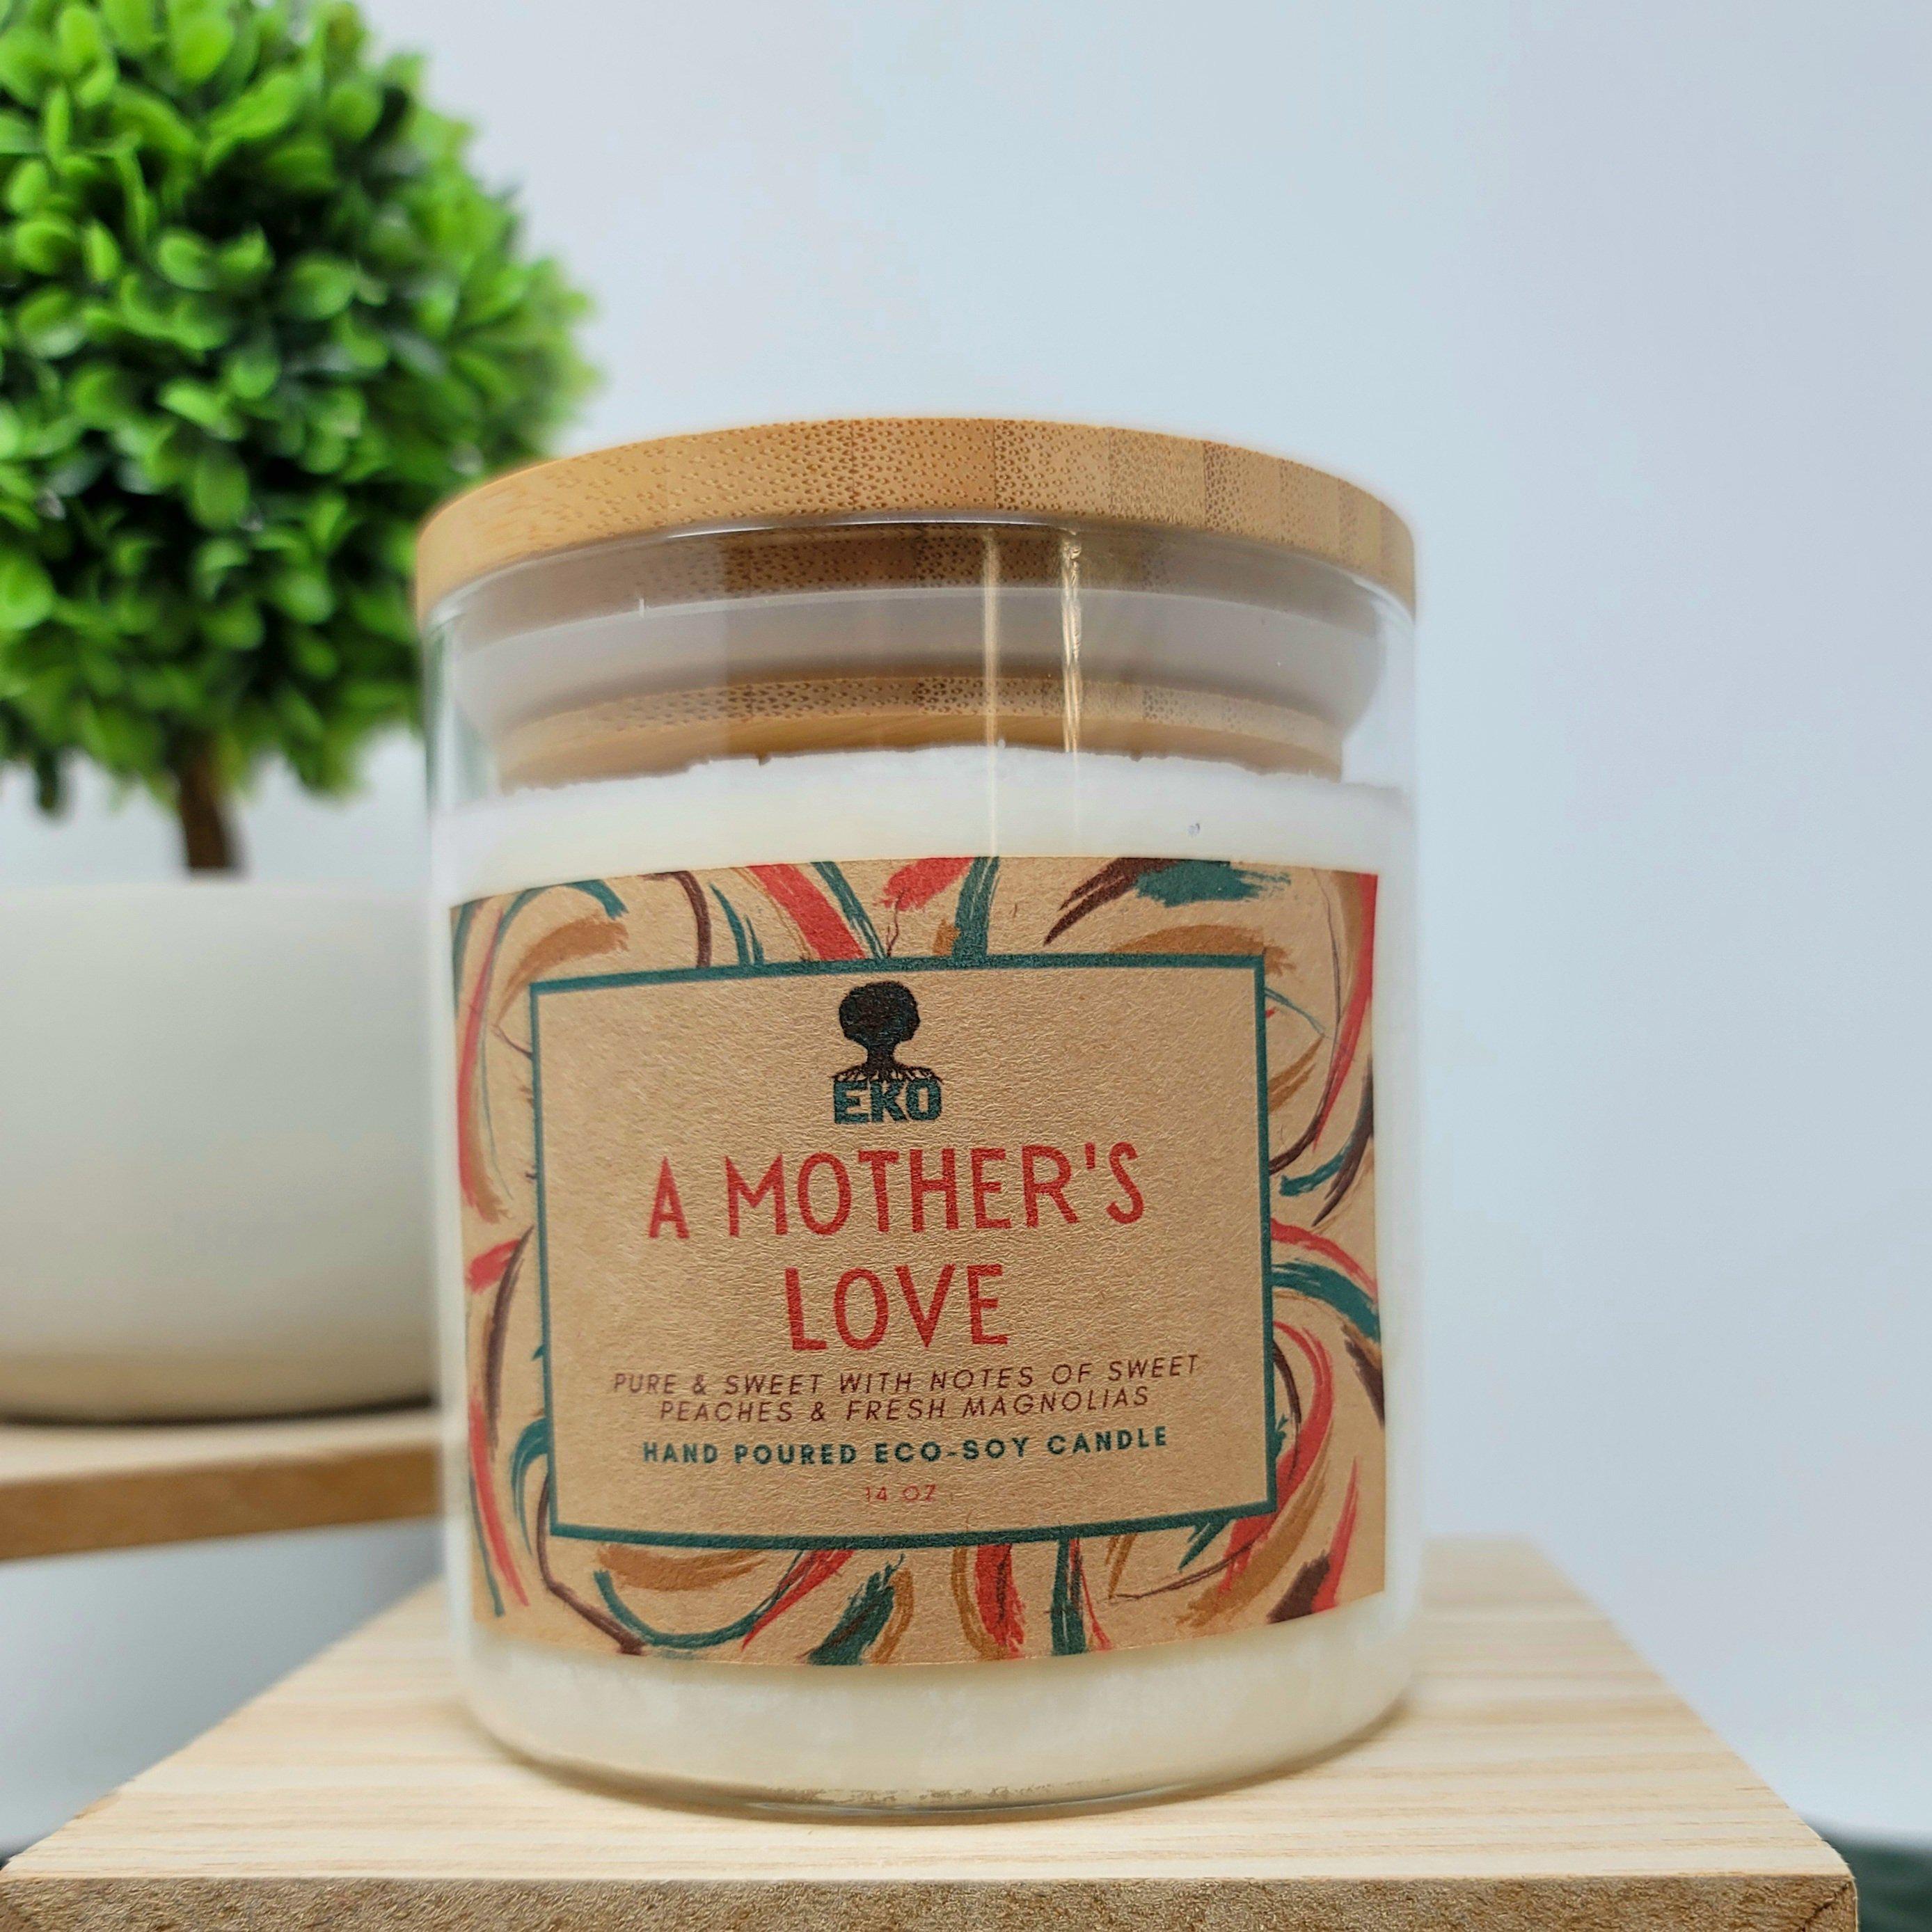 A Mother's Love Candle